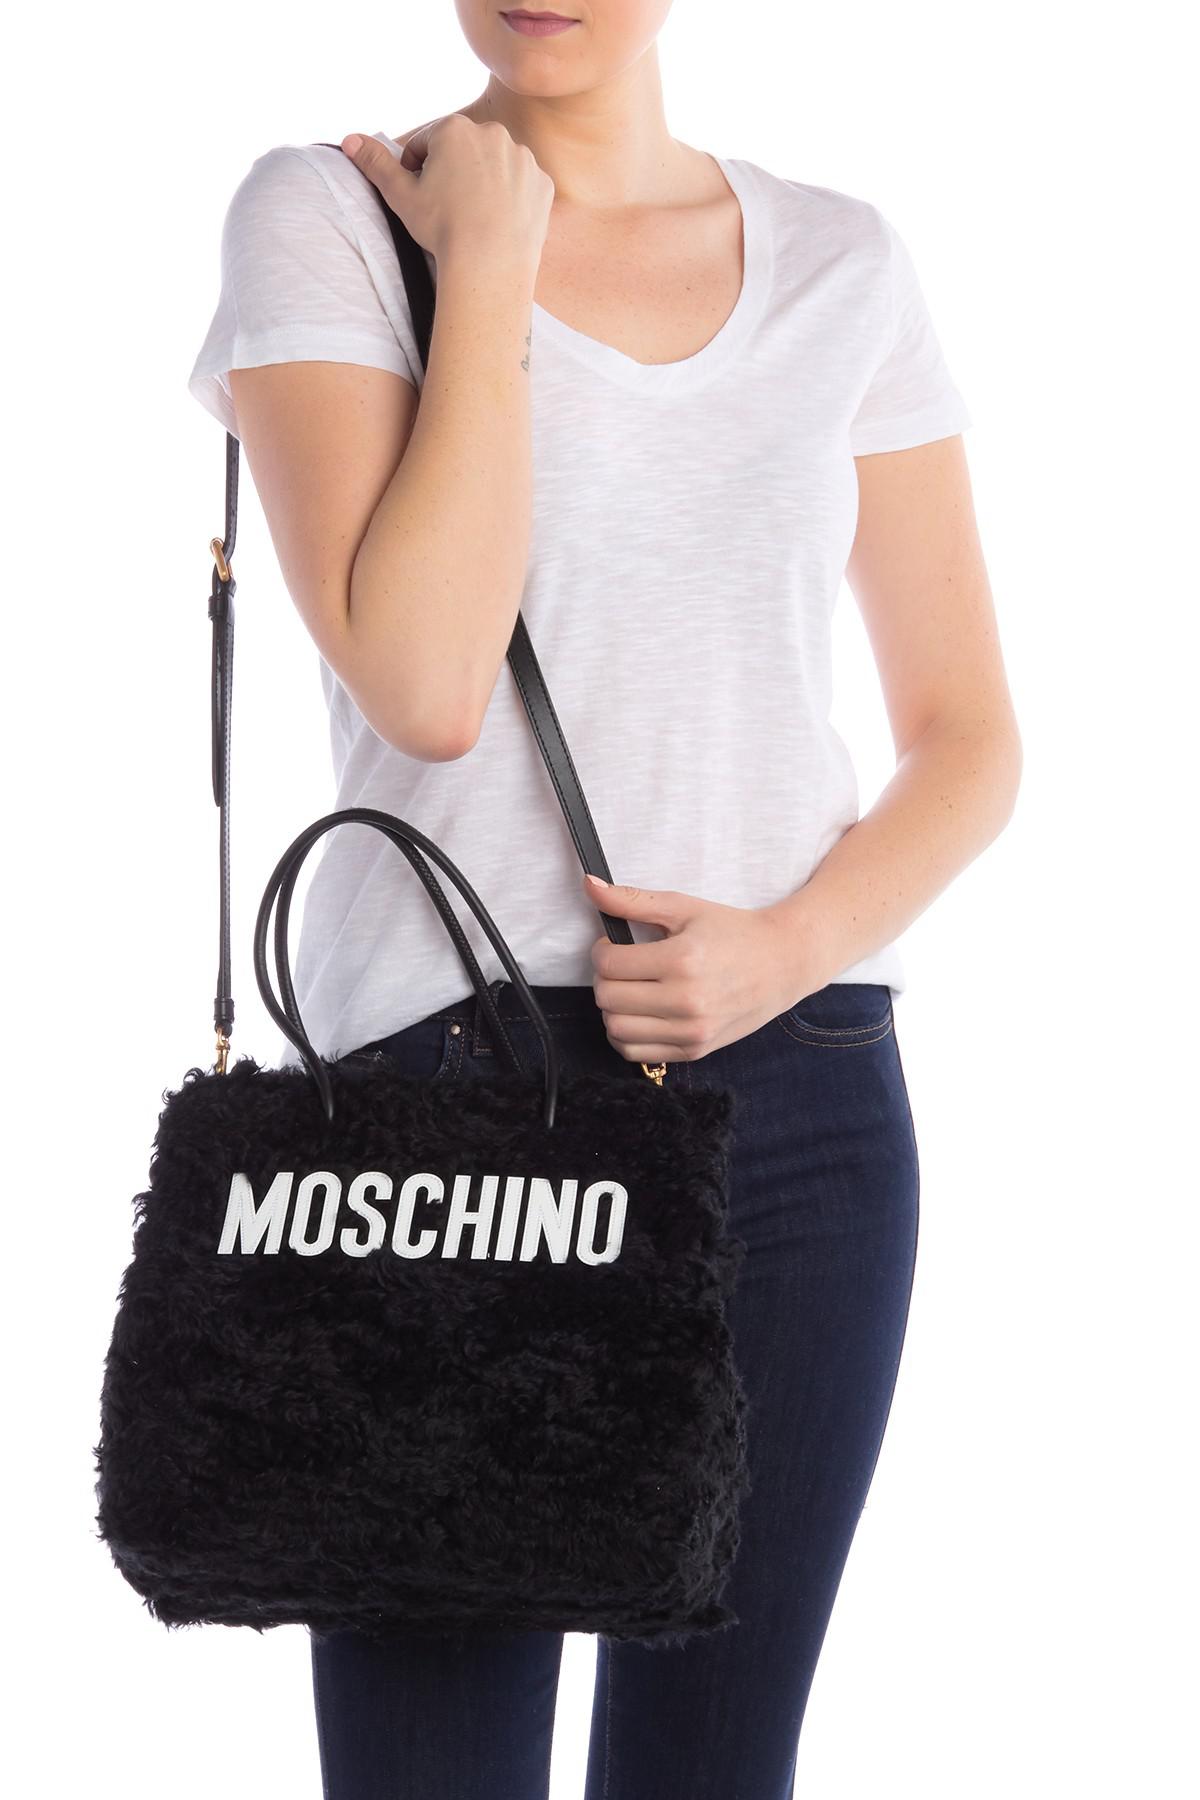 Moschino Mohair Brand Logo Tote Bag in 